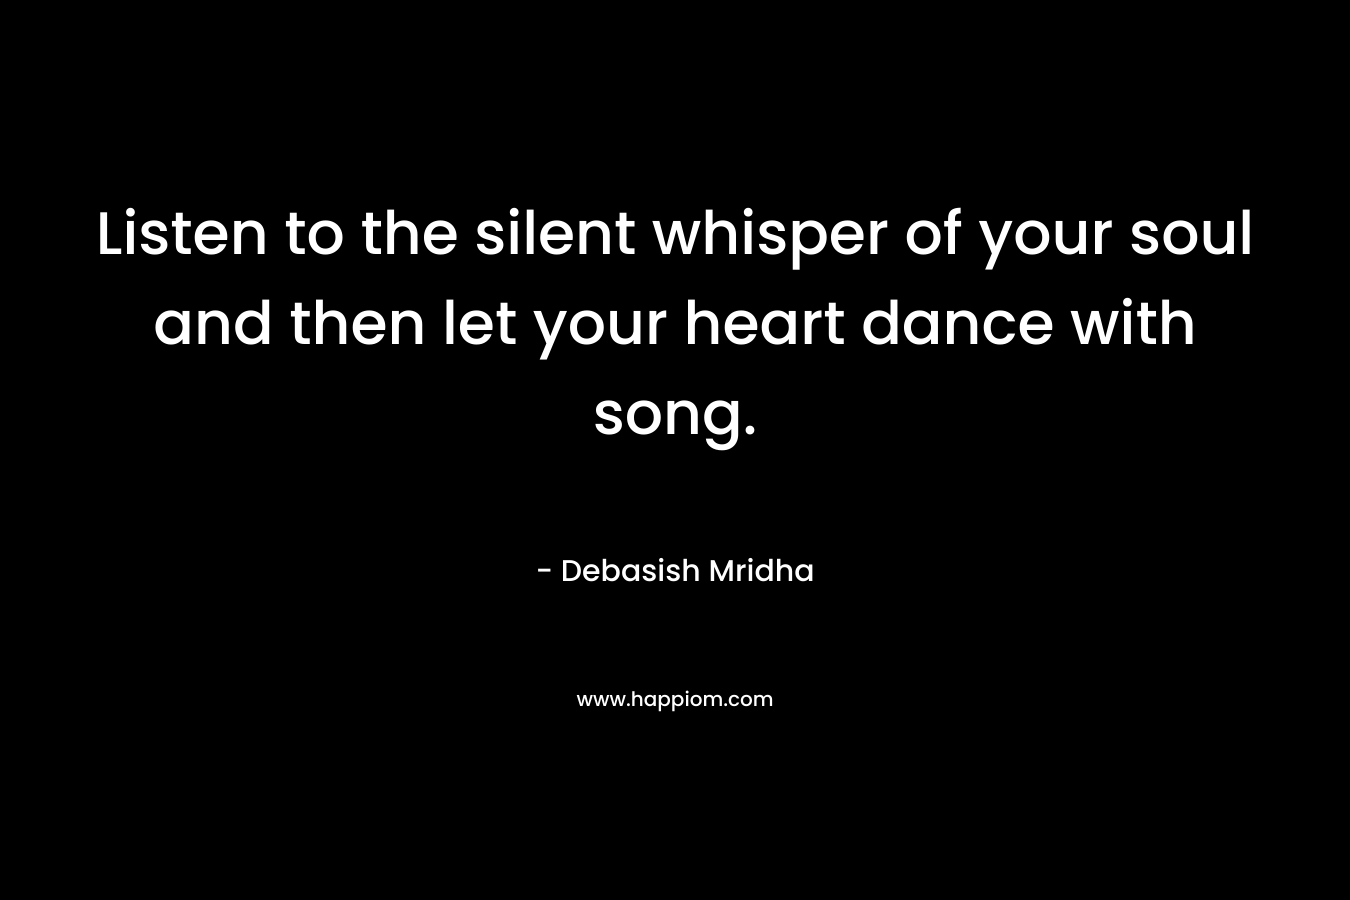 Listen to the silent whisper of your soul and then let your heart dance with song. – Debasish Mridha